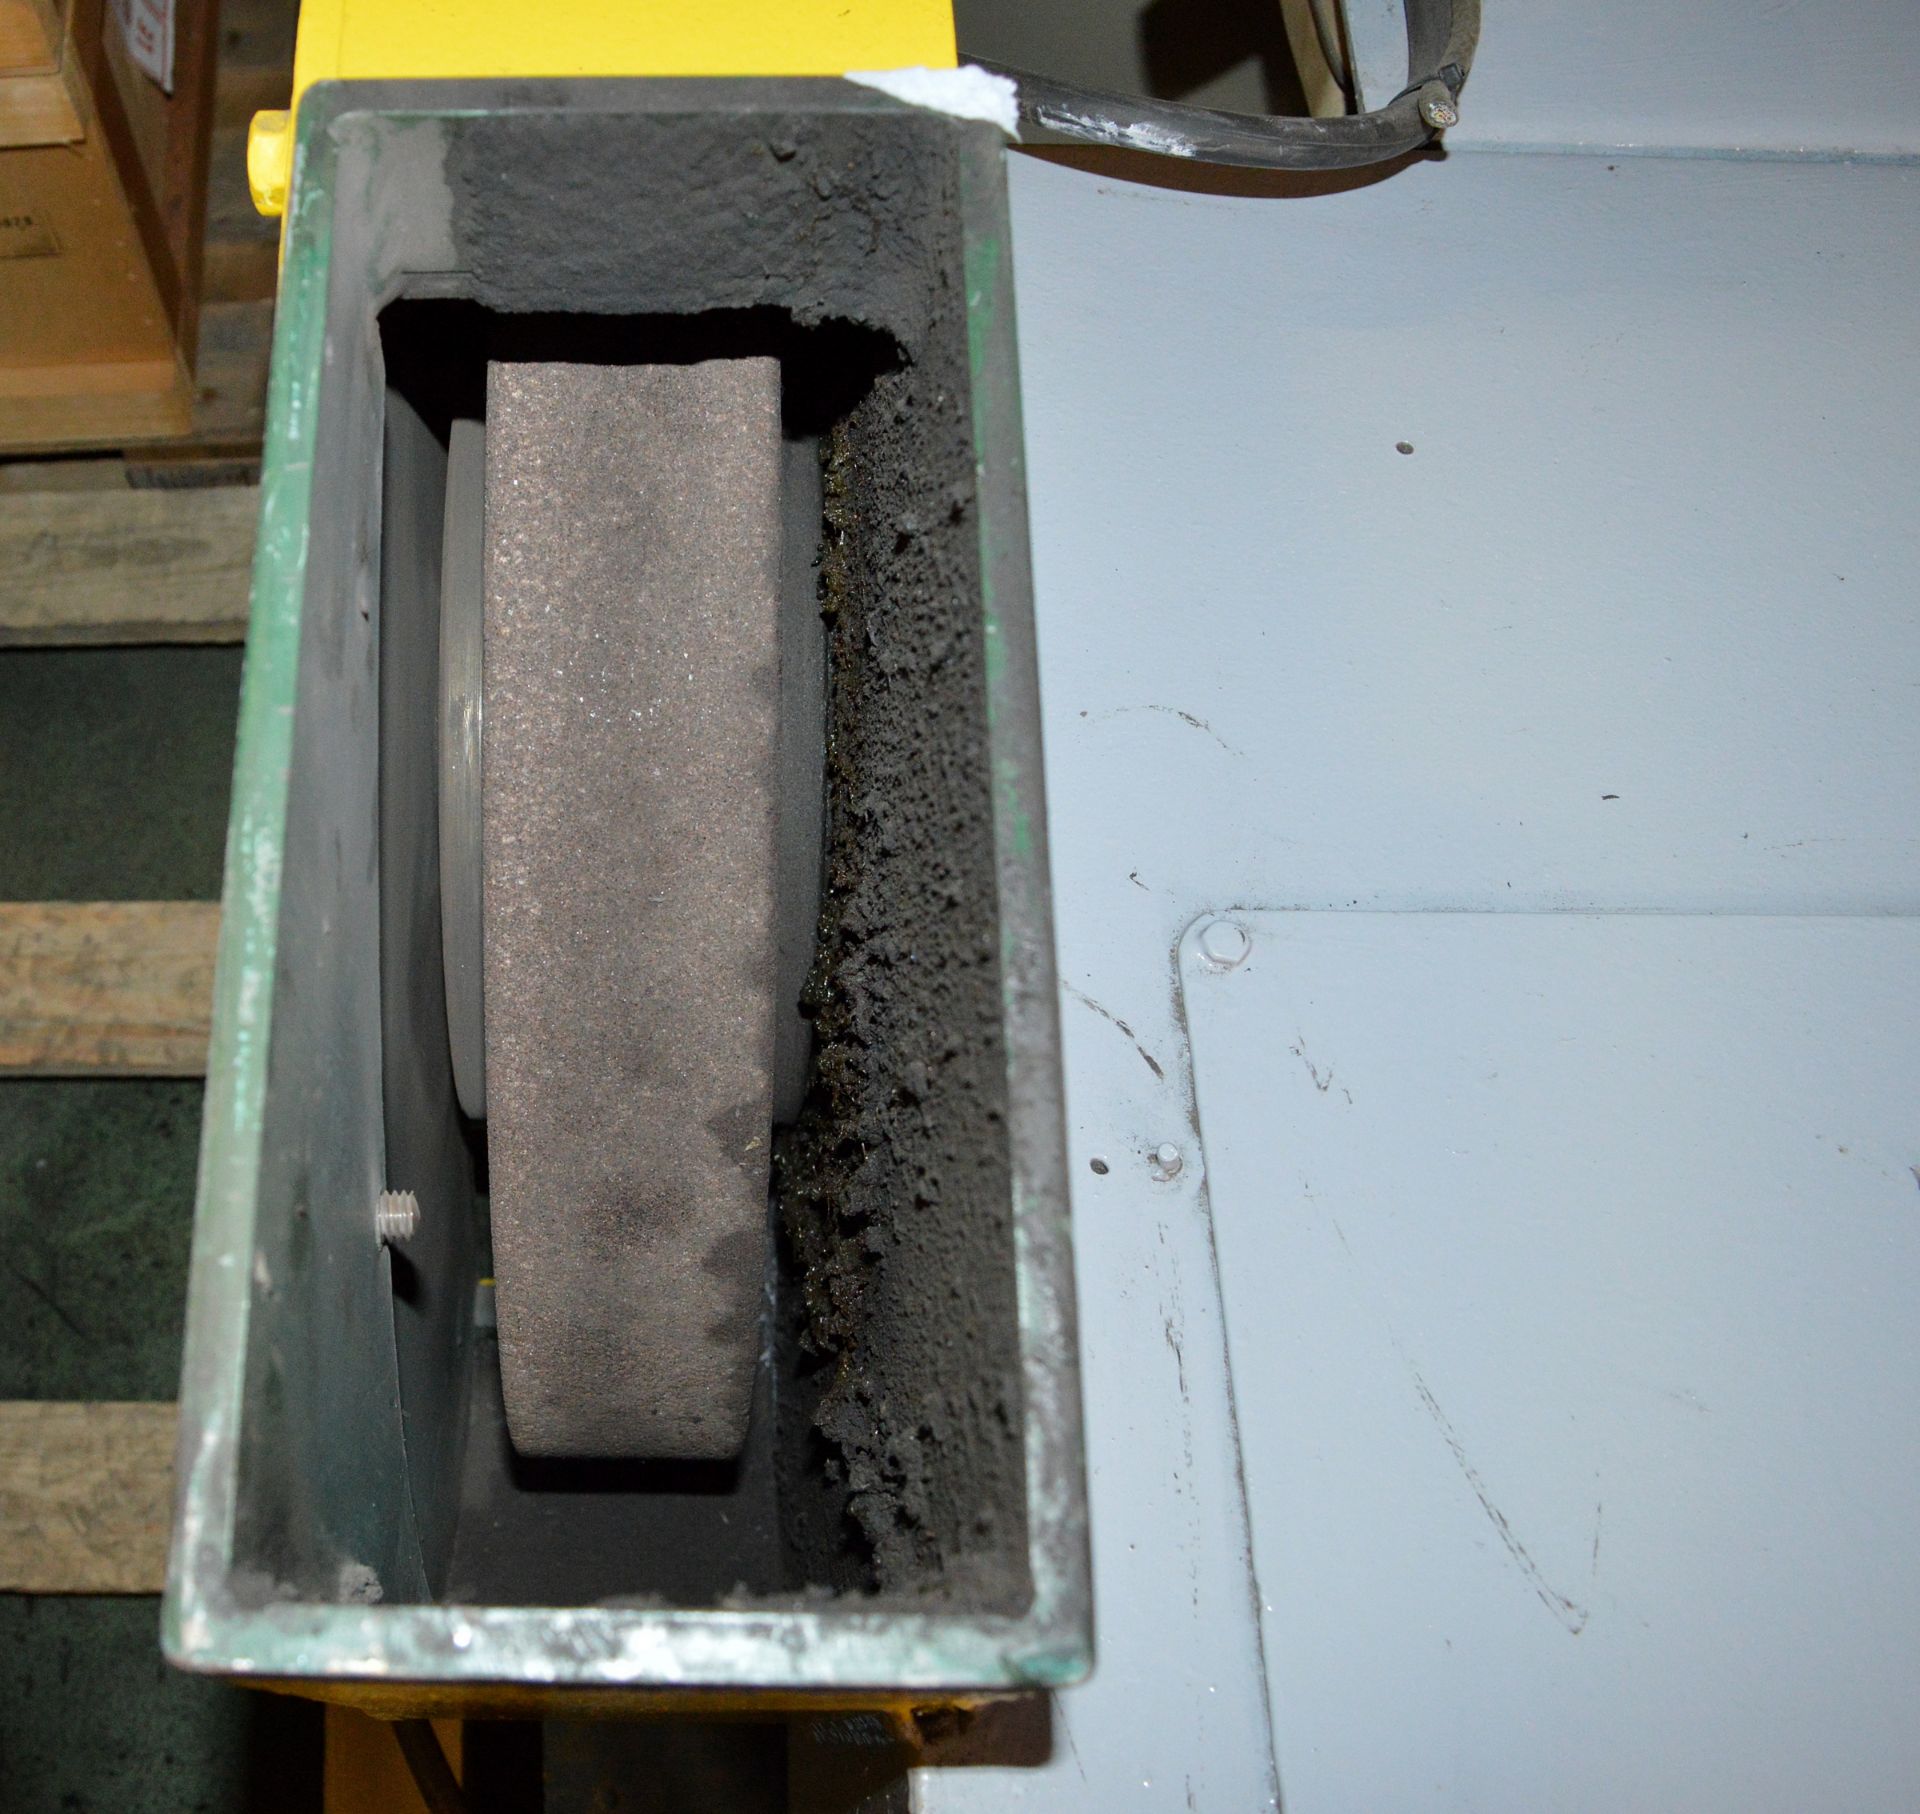 Grinder 24x3 Inch DE-Sidestone With Dustrax Dust Collector - Image 10 of 12